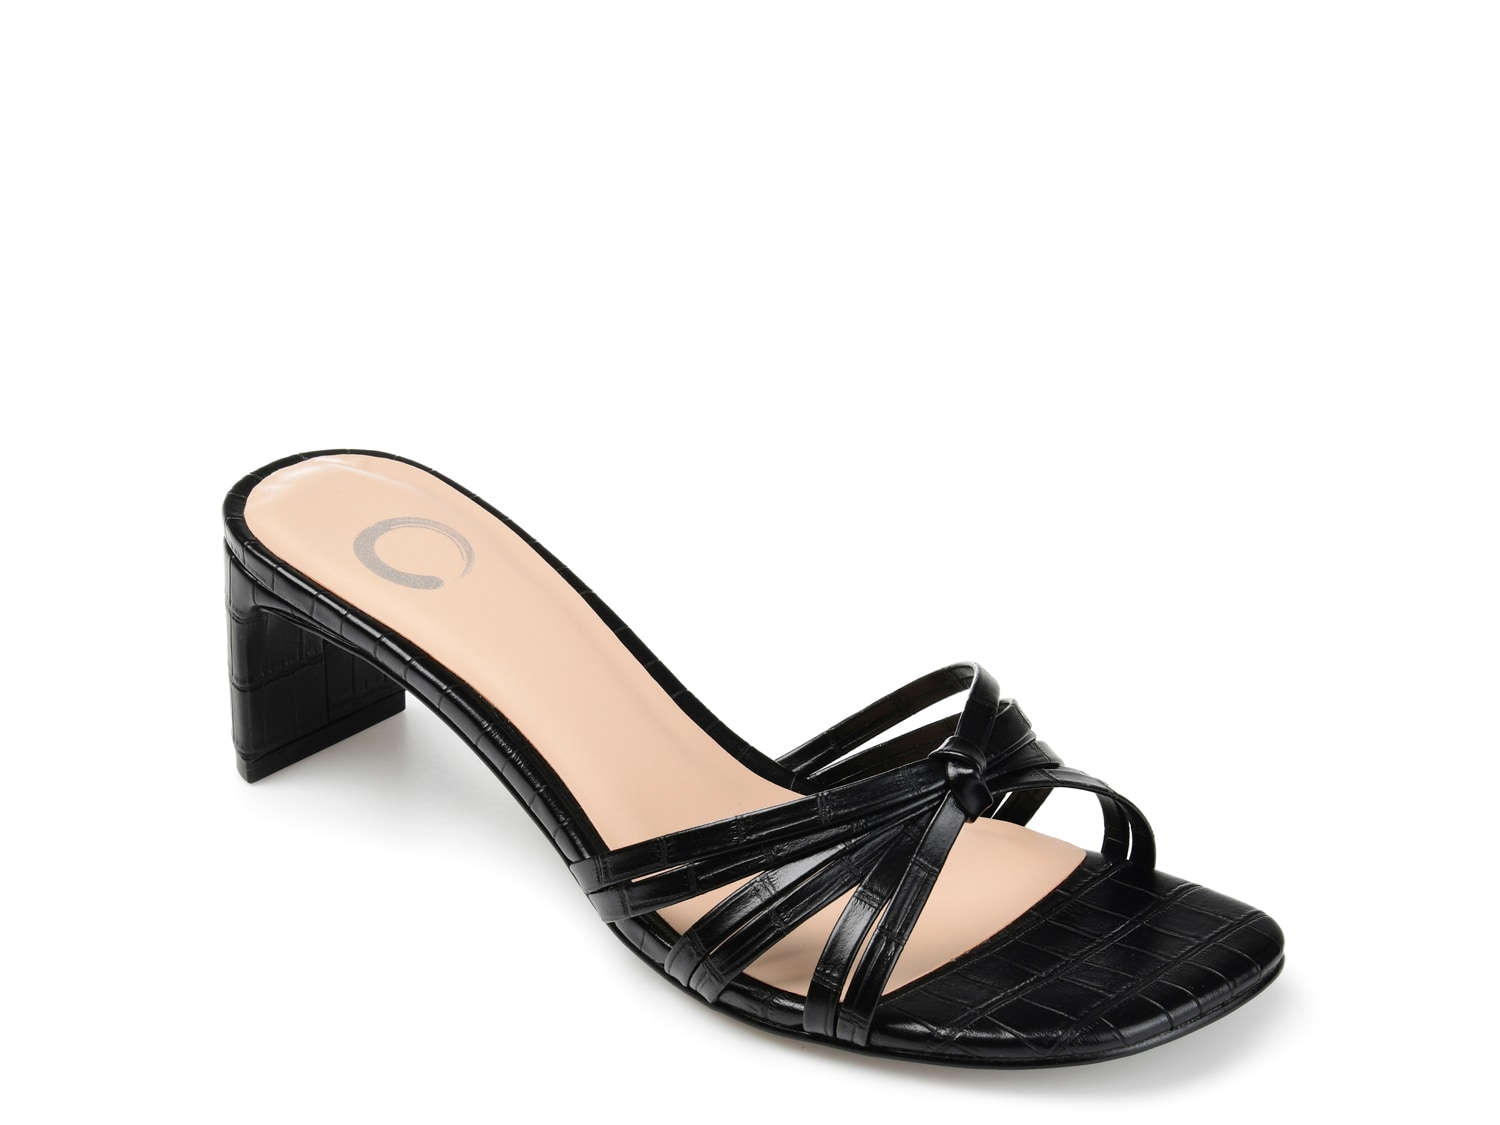 Journee Collection Karina Sandal - Free Shipping | DSW